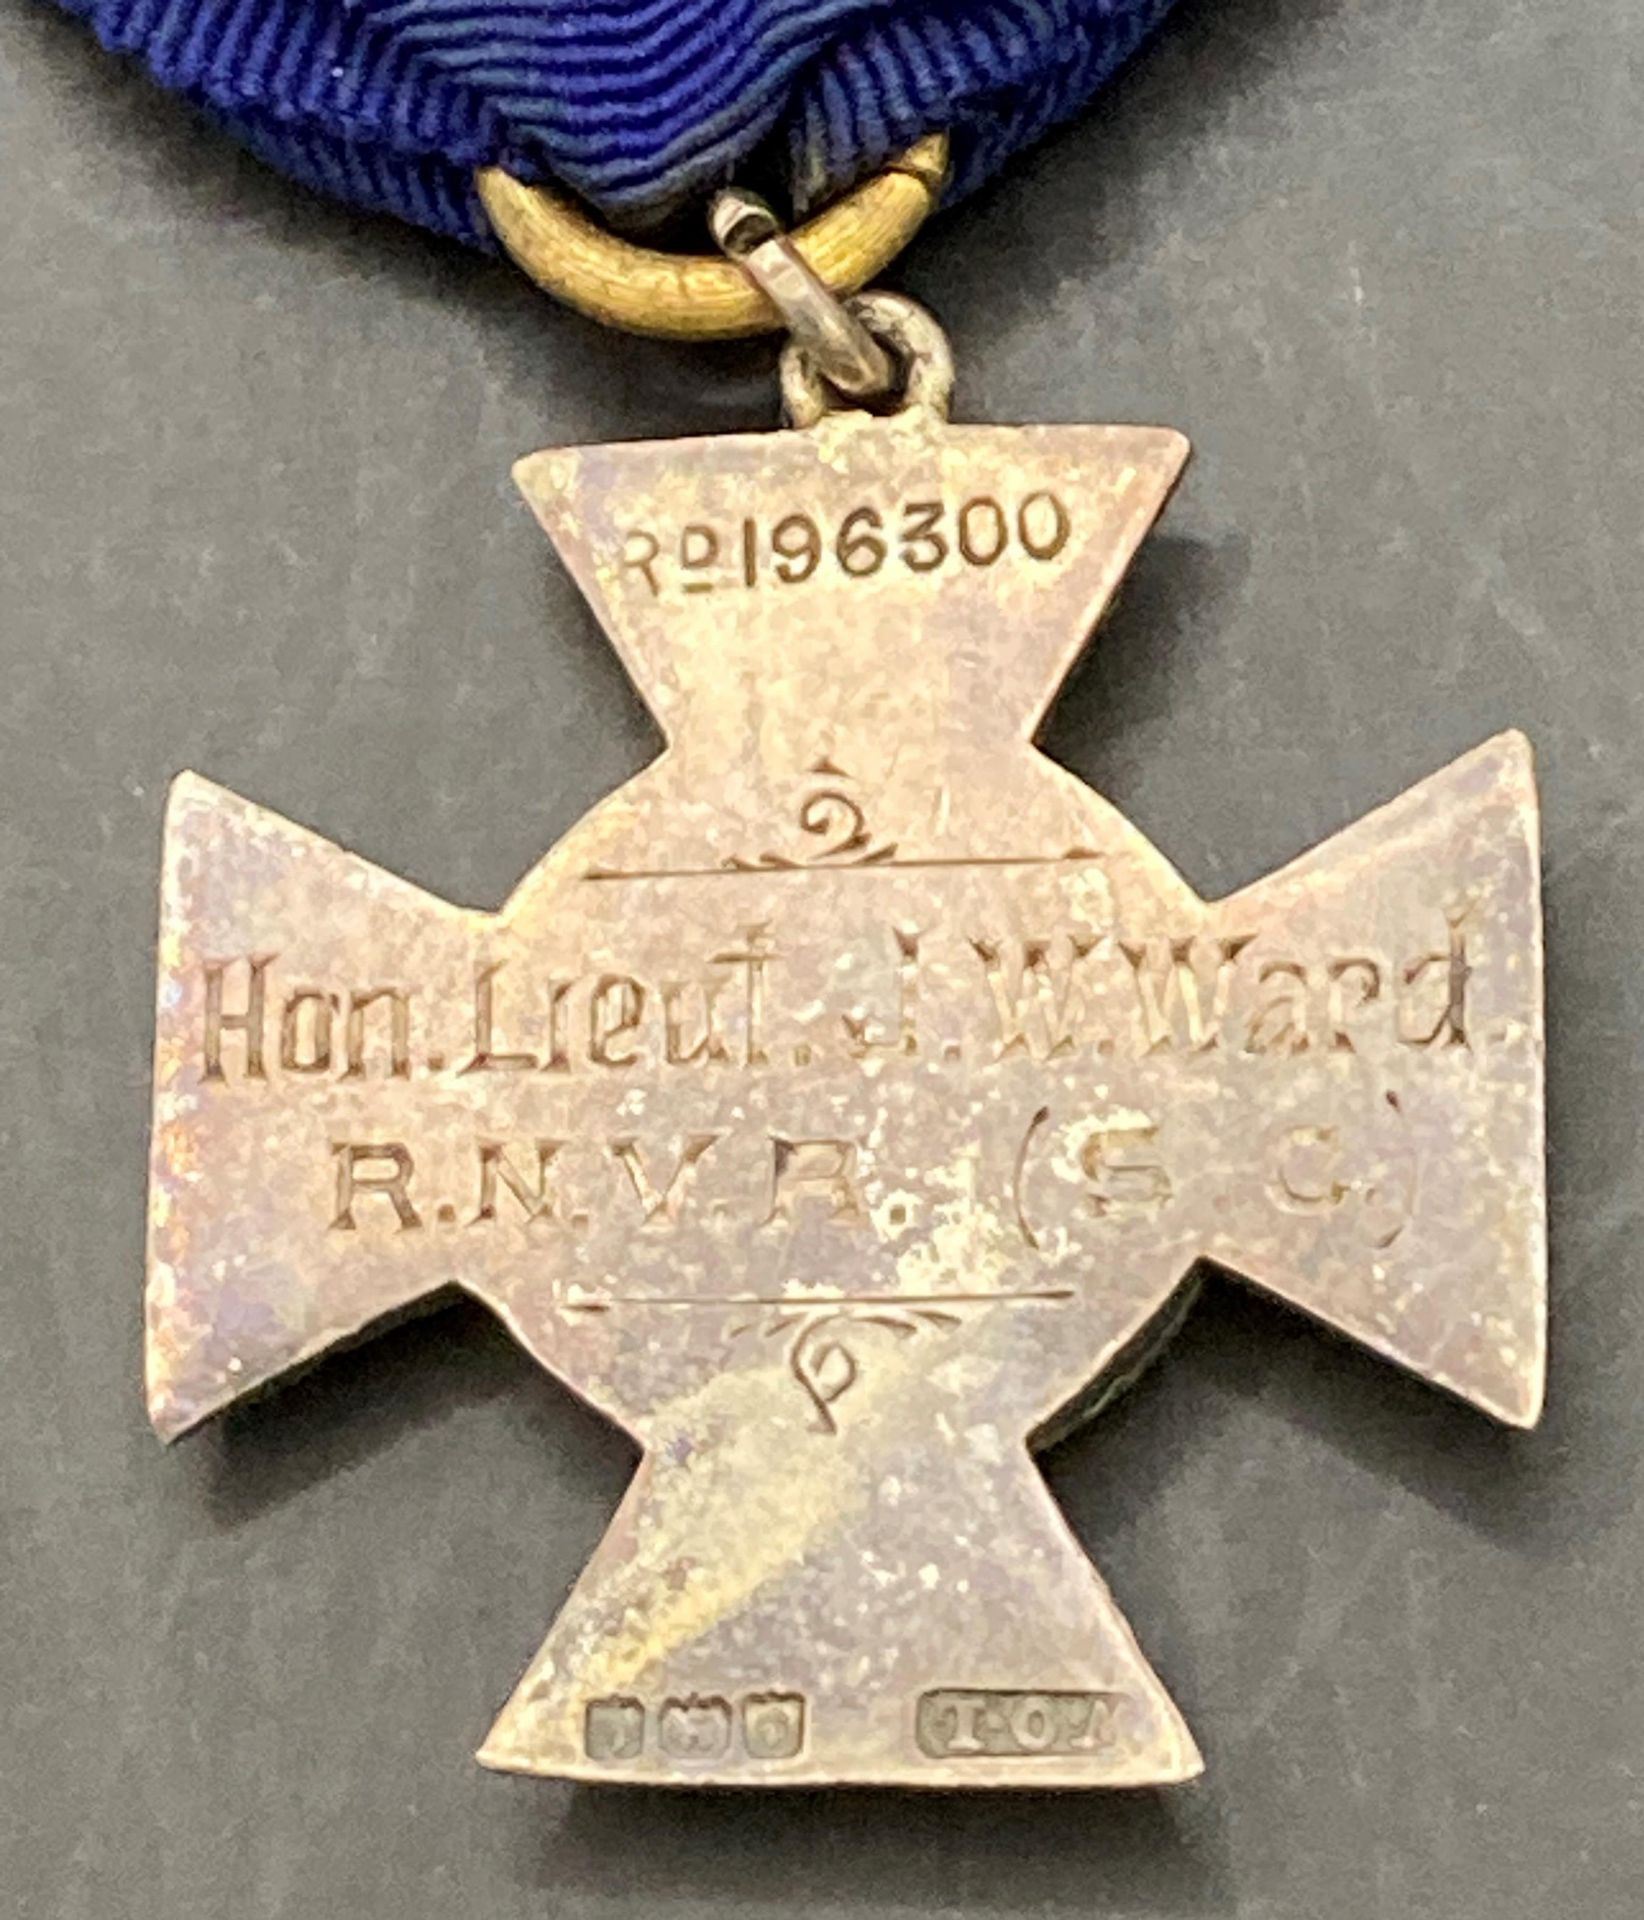 Navy League Cross for Special Service named to HON. LIEUT. J.W. WARD. R.N.V.R. (S.C.). - Image 3 of 3